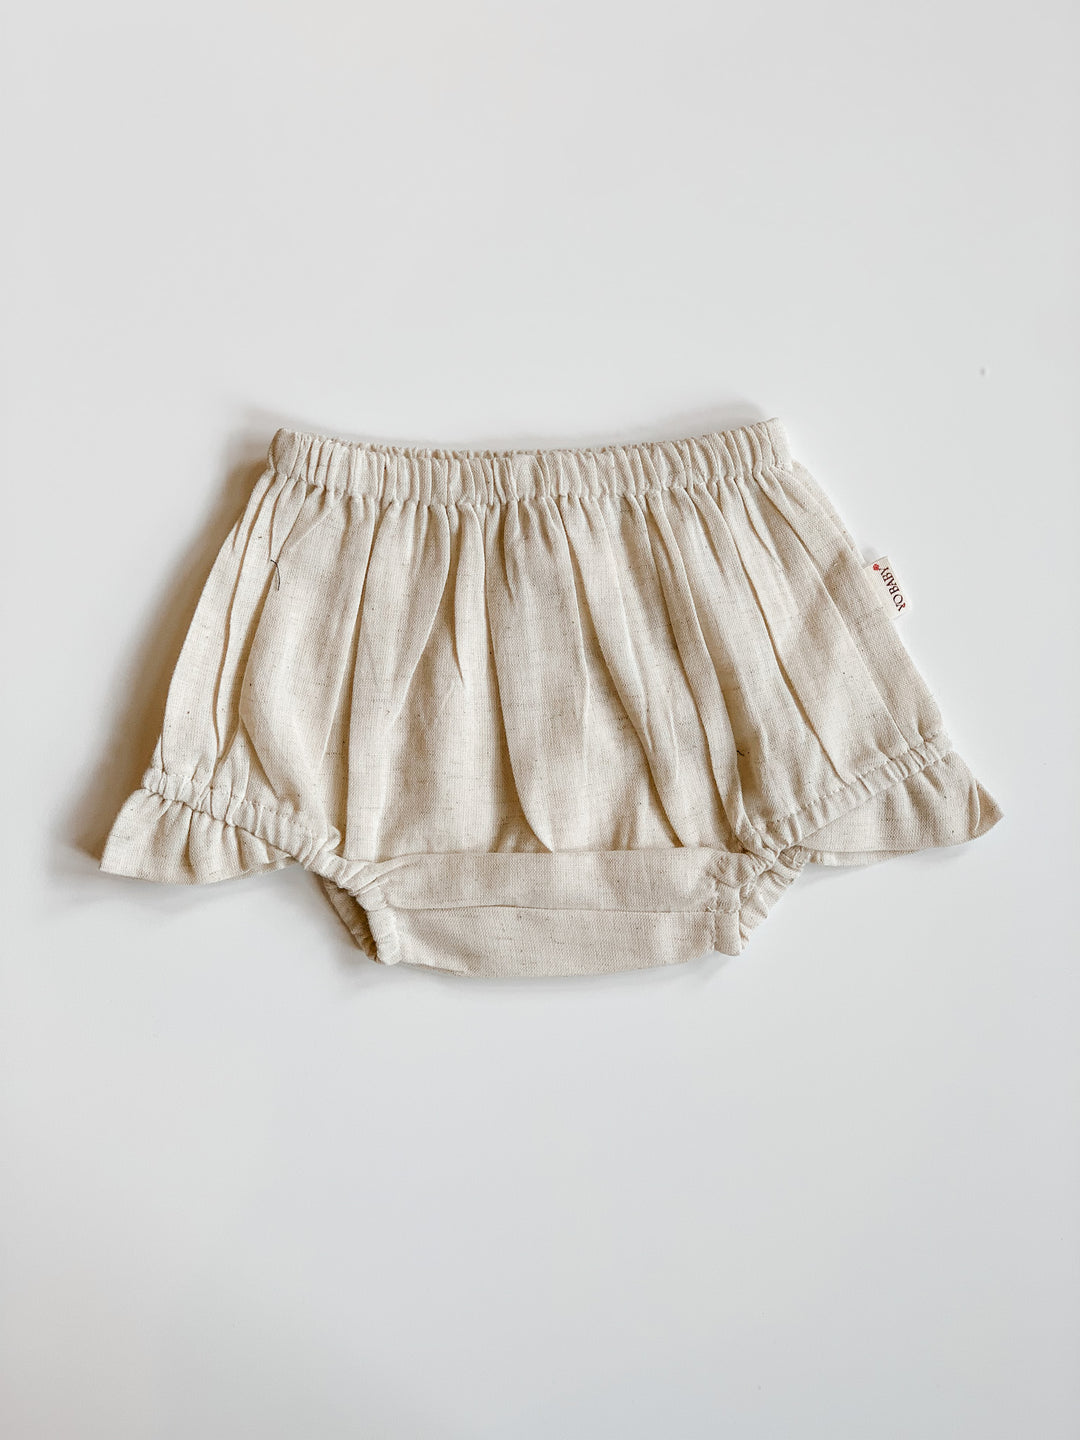 Ivory Winged Diaper Cover